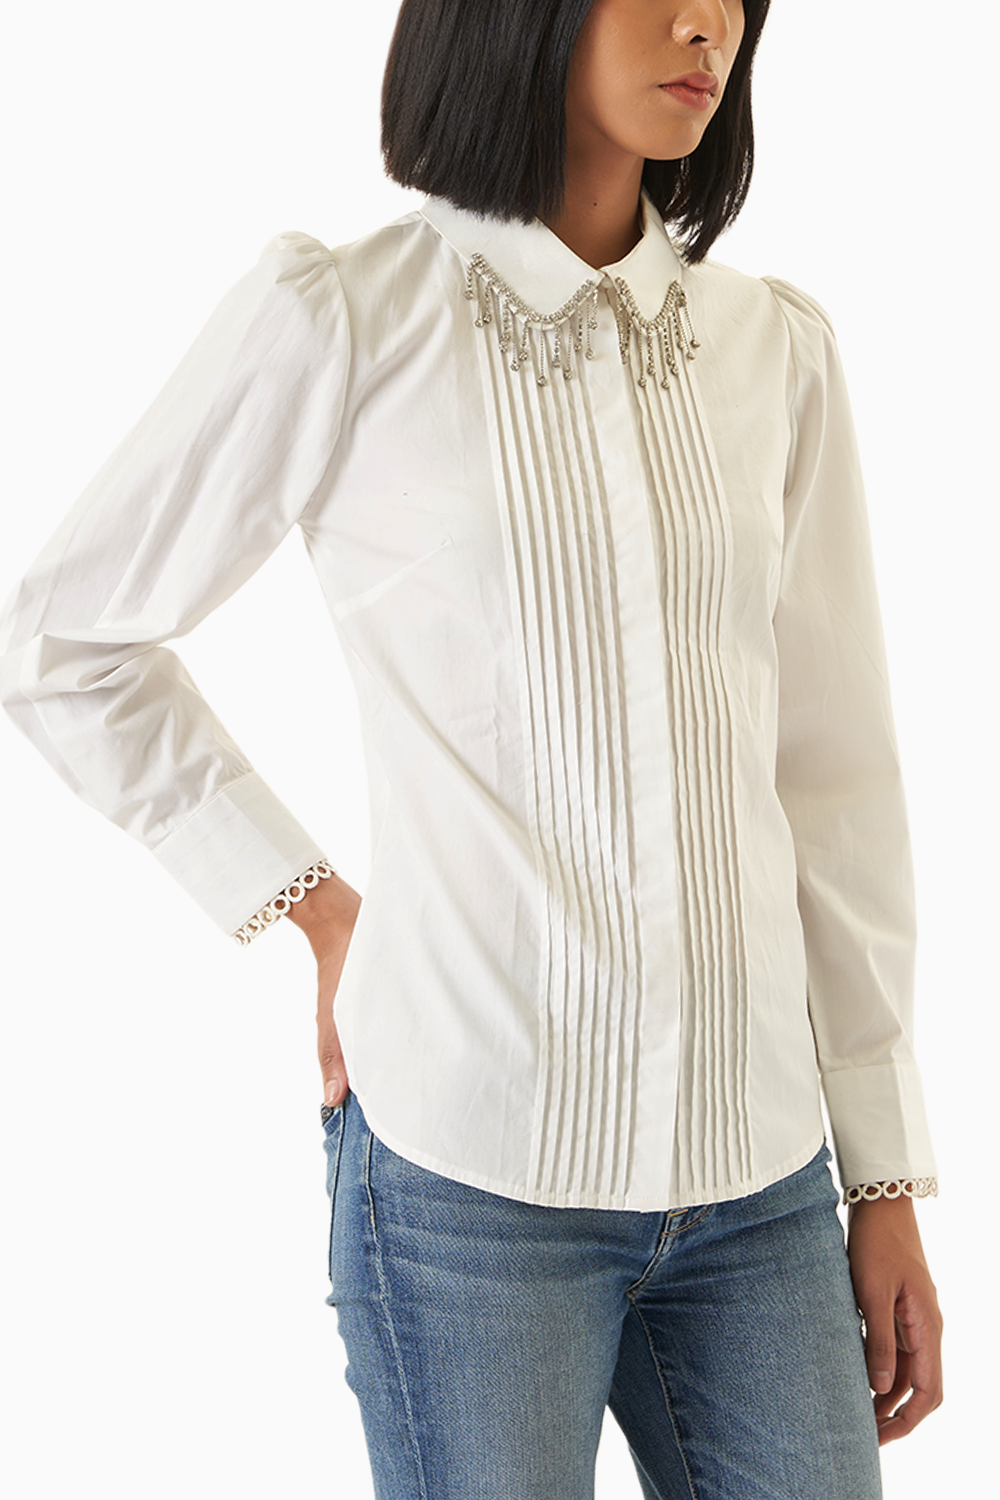 White Pintucked Shirt with Embellished Collar